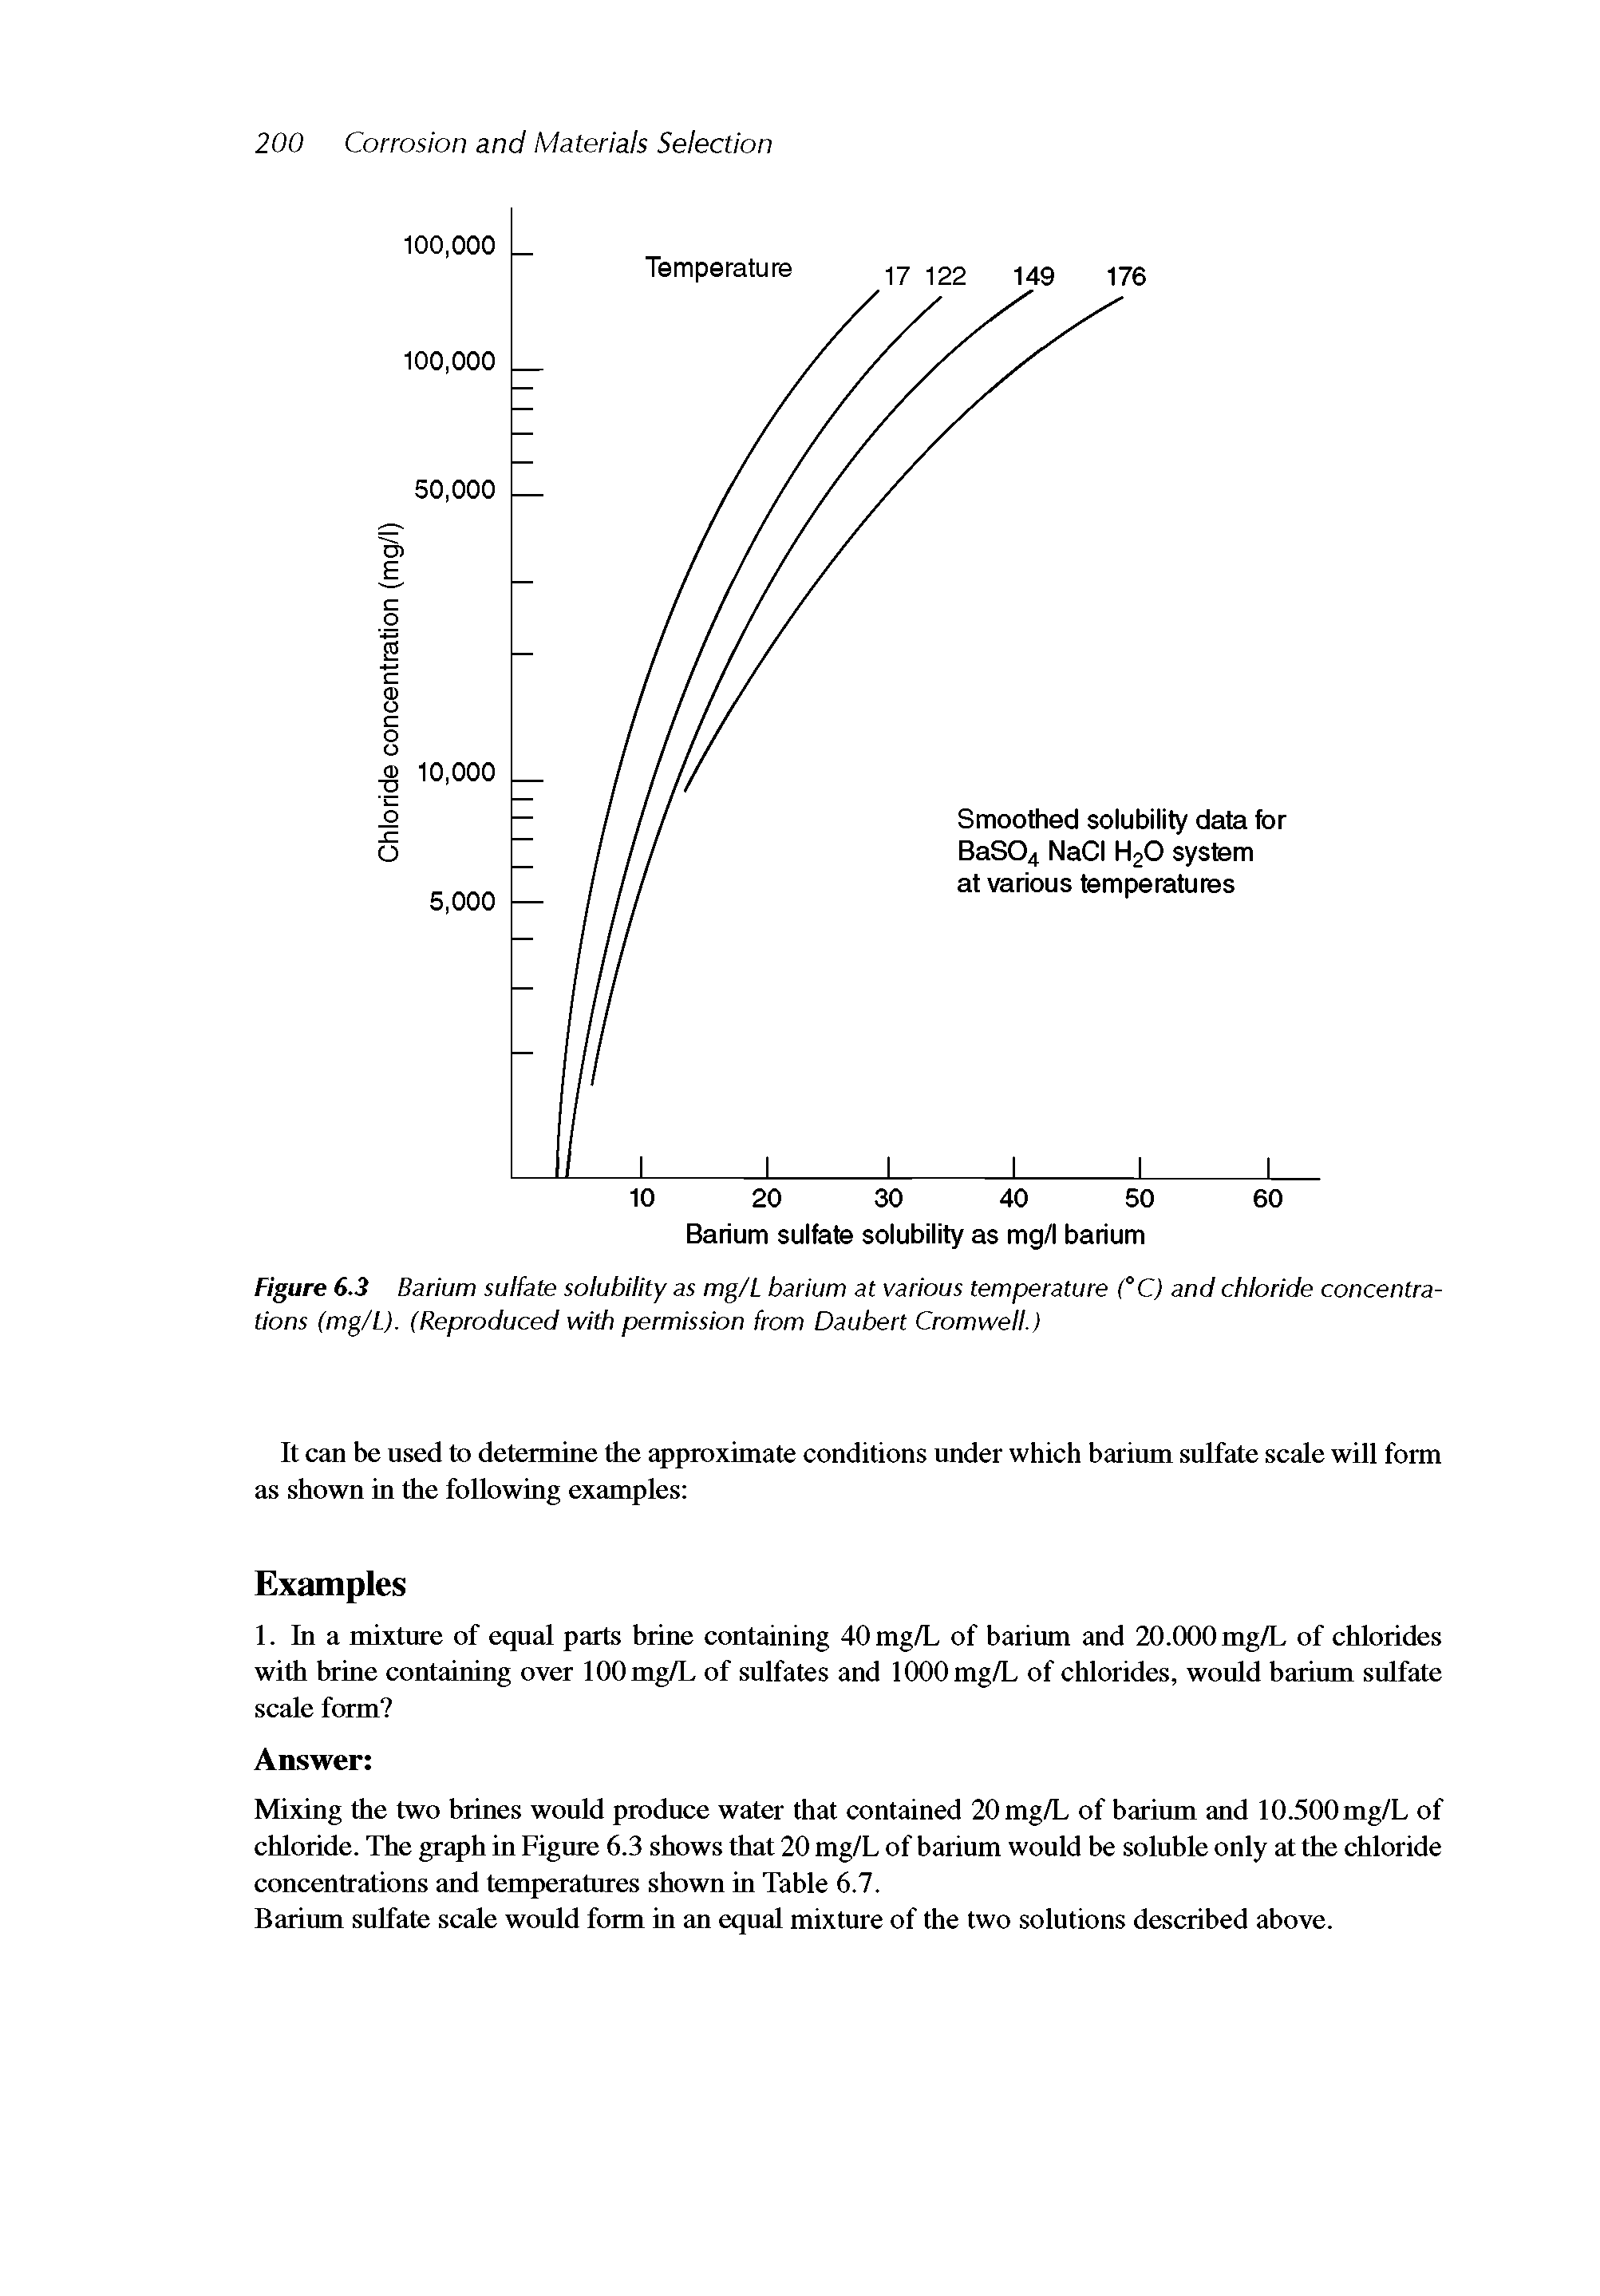 Figure 6.3 Barium sulfate solubility as mg/L barium at various temperature CC) and chloride concentrations (mg/L). (Reproduced with permission from Daubert Cromwell.)...